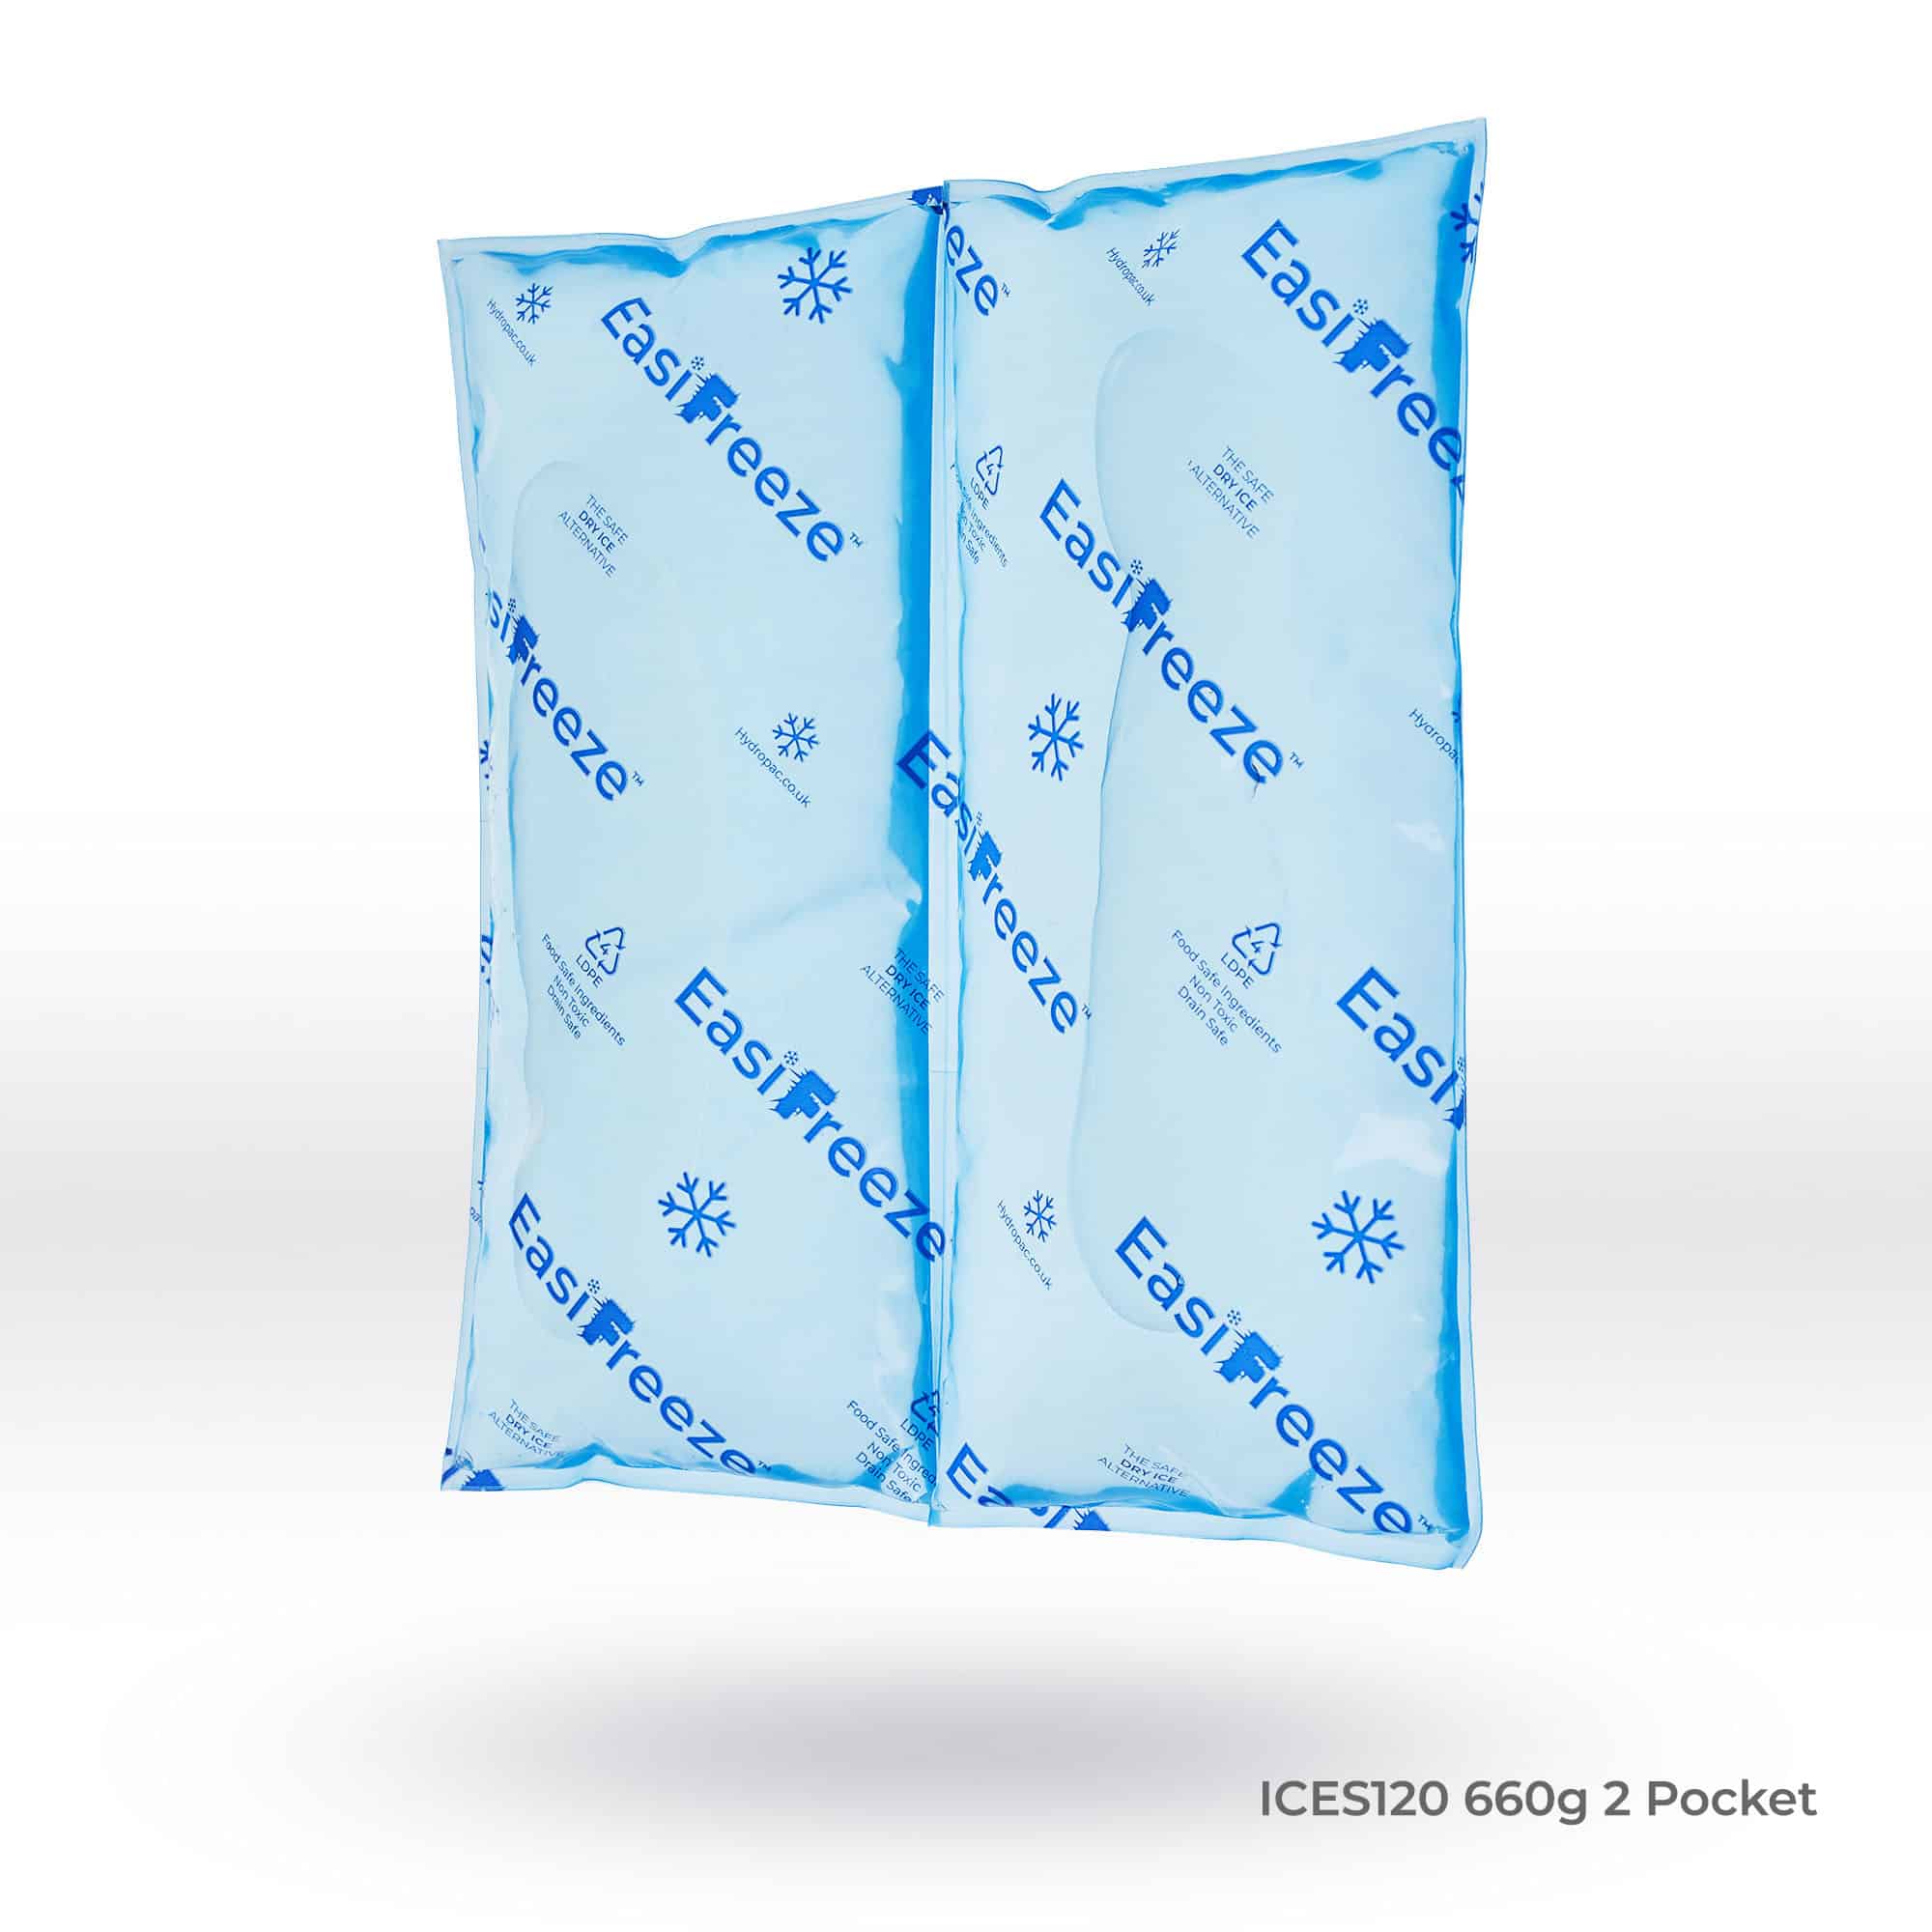 ICES120-EasiFreeze-660g-2-Pocket-LR-with-Text.jpg